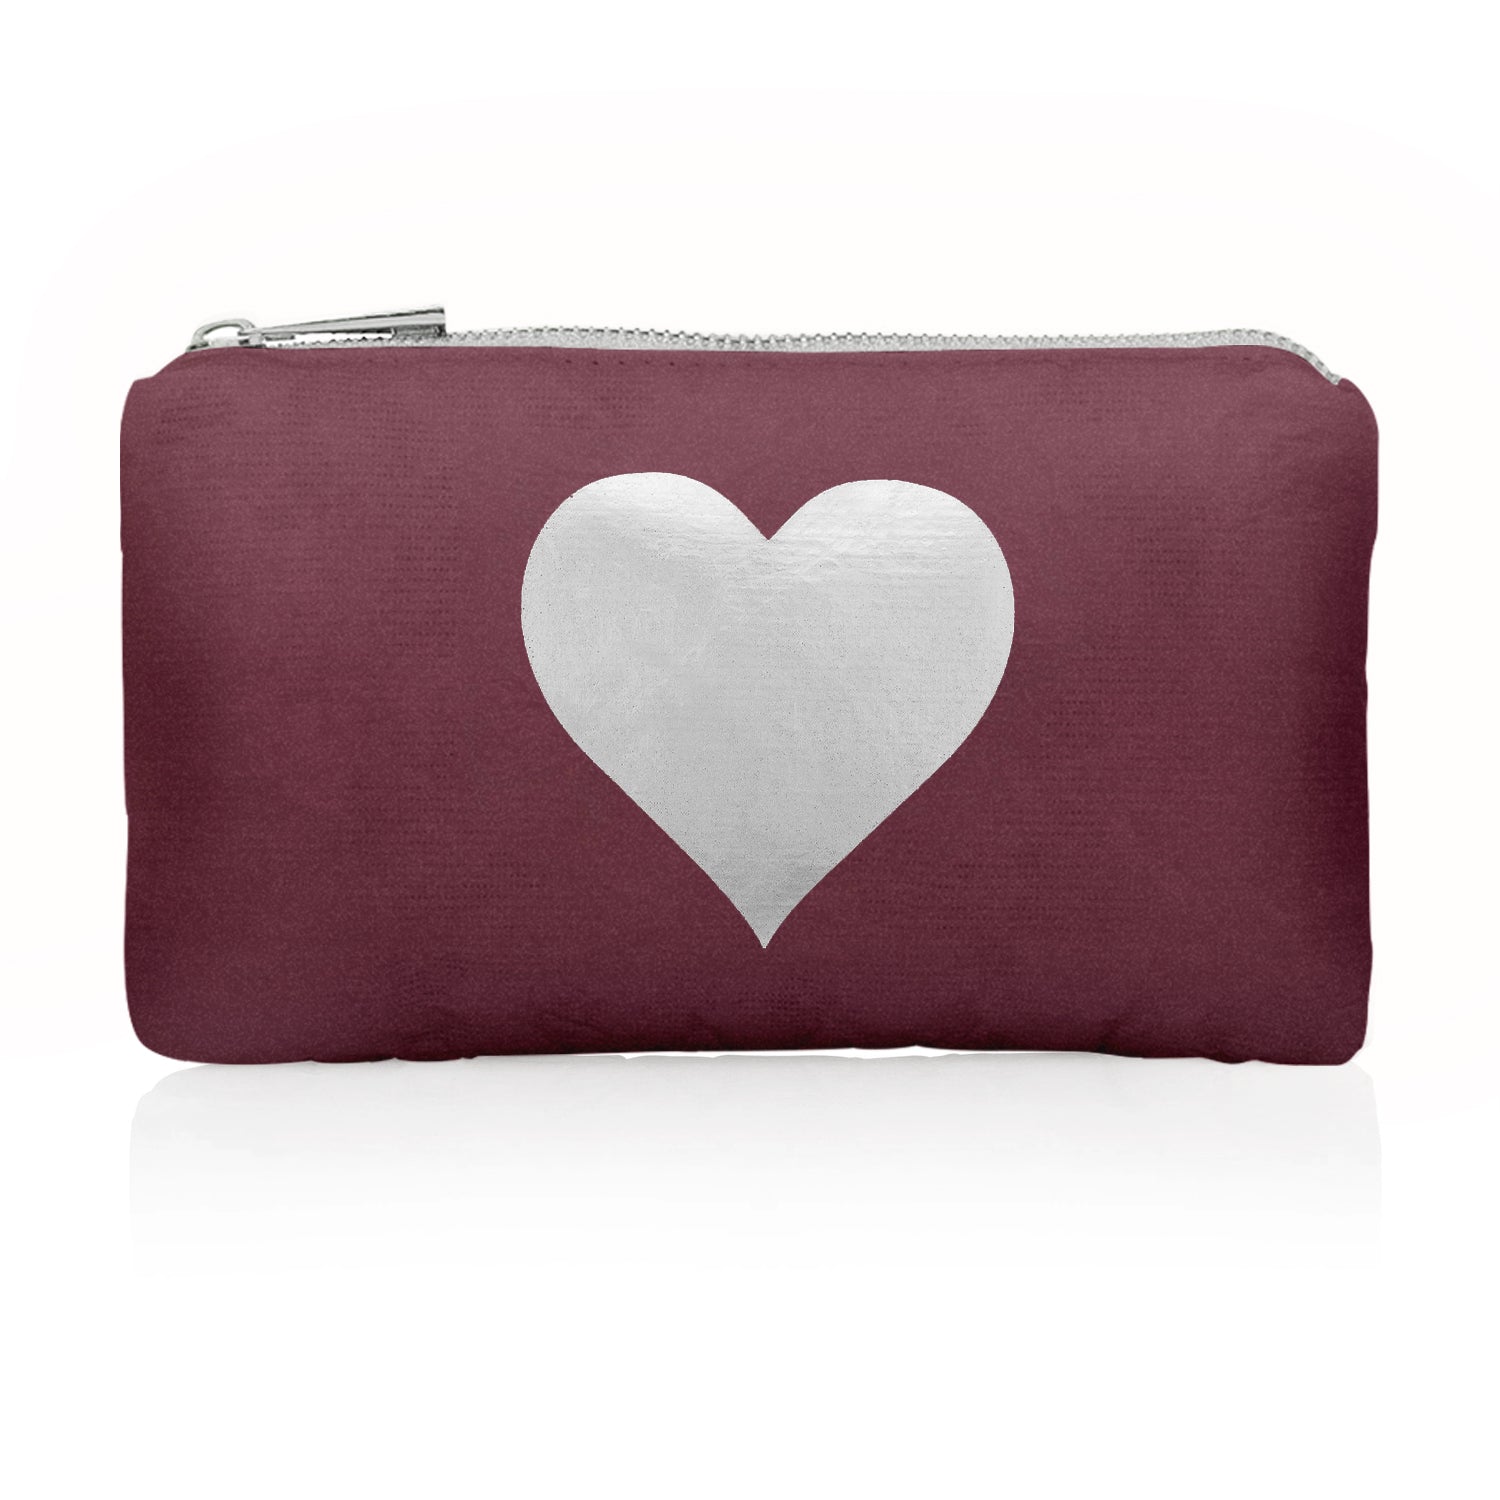 Mini zipper pack in shimmer cabernet with a silver heart